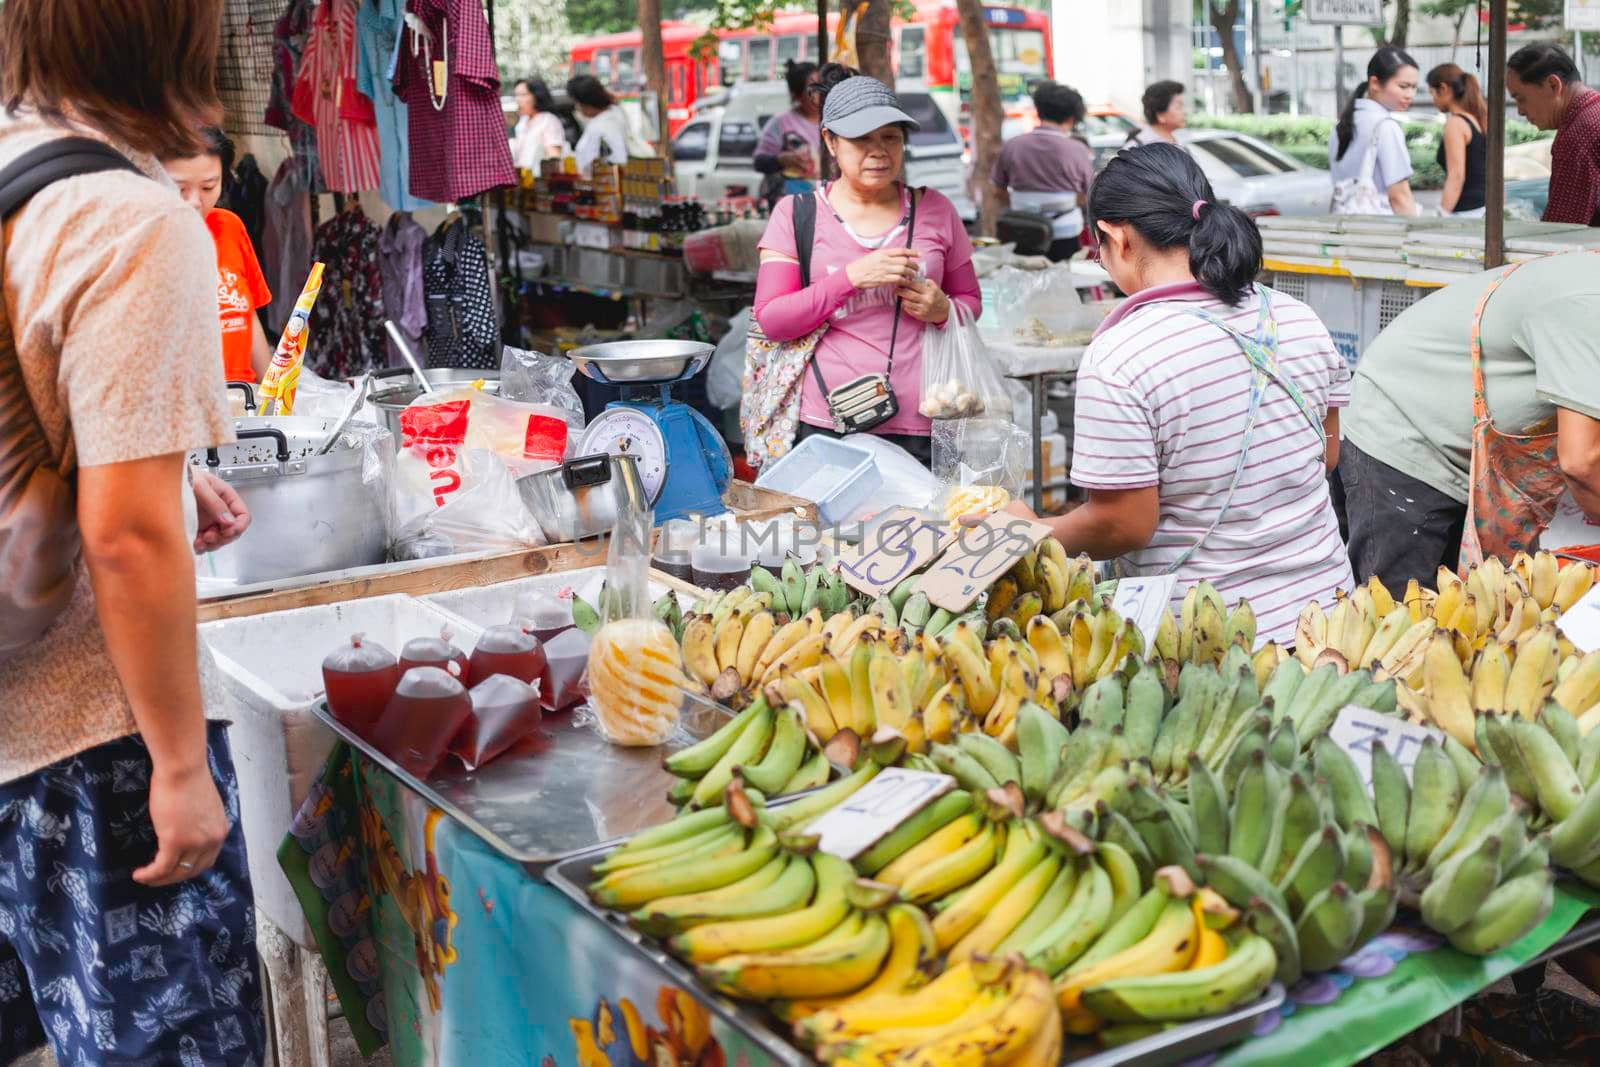 BANGKOK, THAILAND - October 23, 2012. Local people and tourists buy food on street market. Fruits and ready-to-eat soups and sauces in plastic bags.